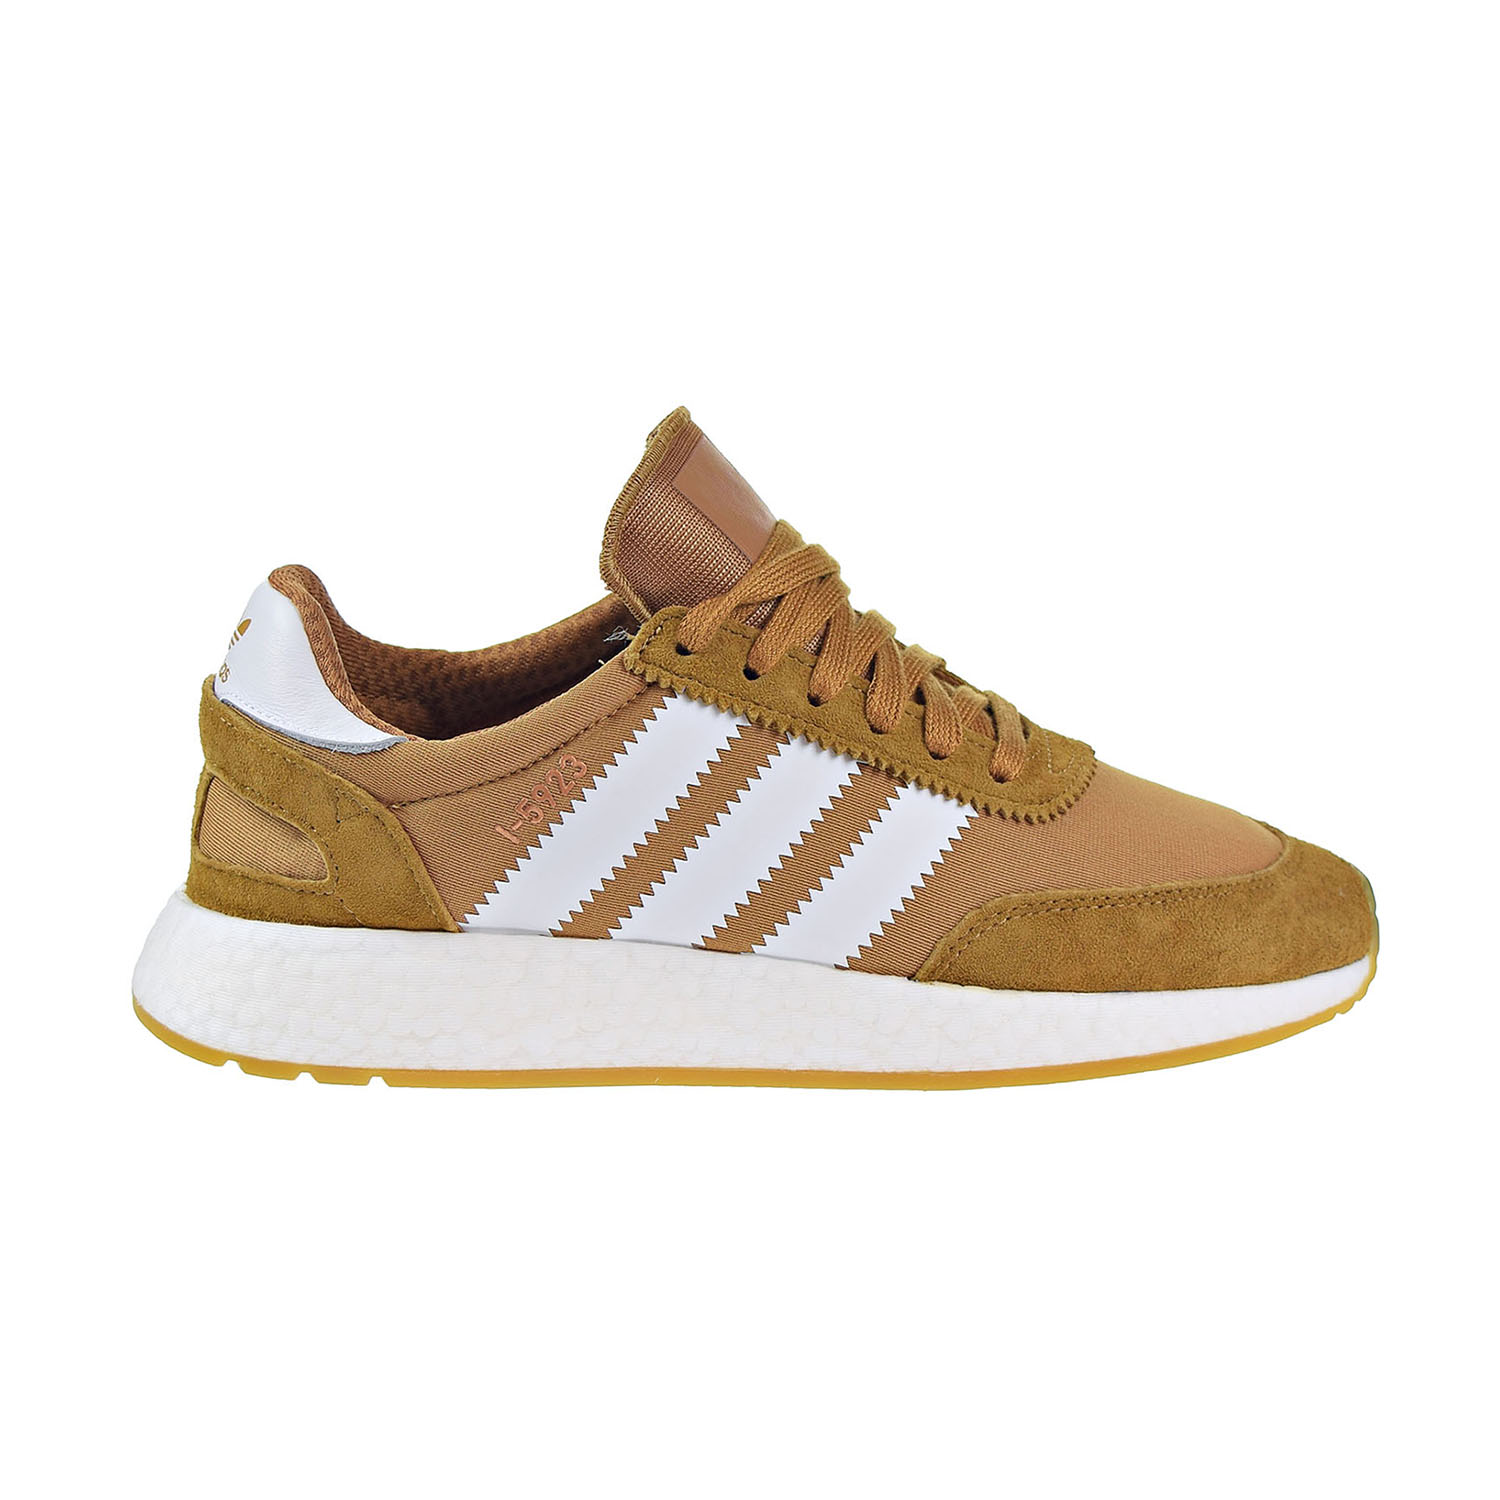 white and tan adidas shoes